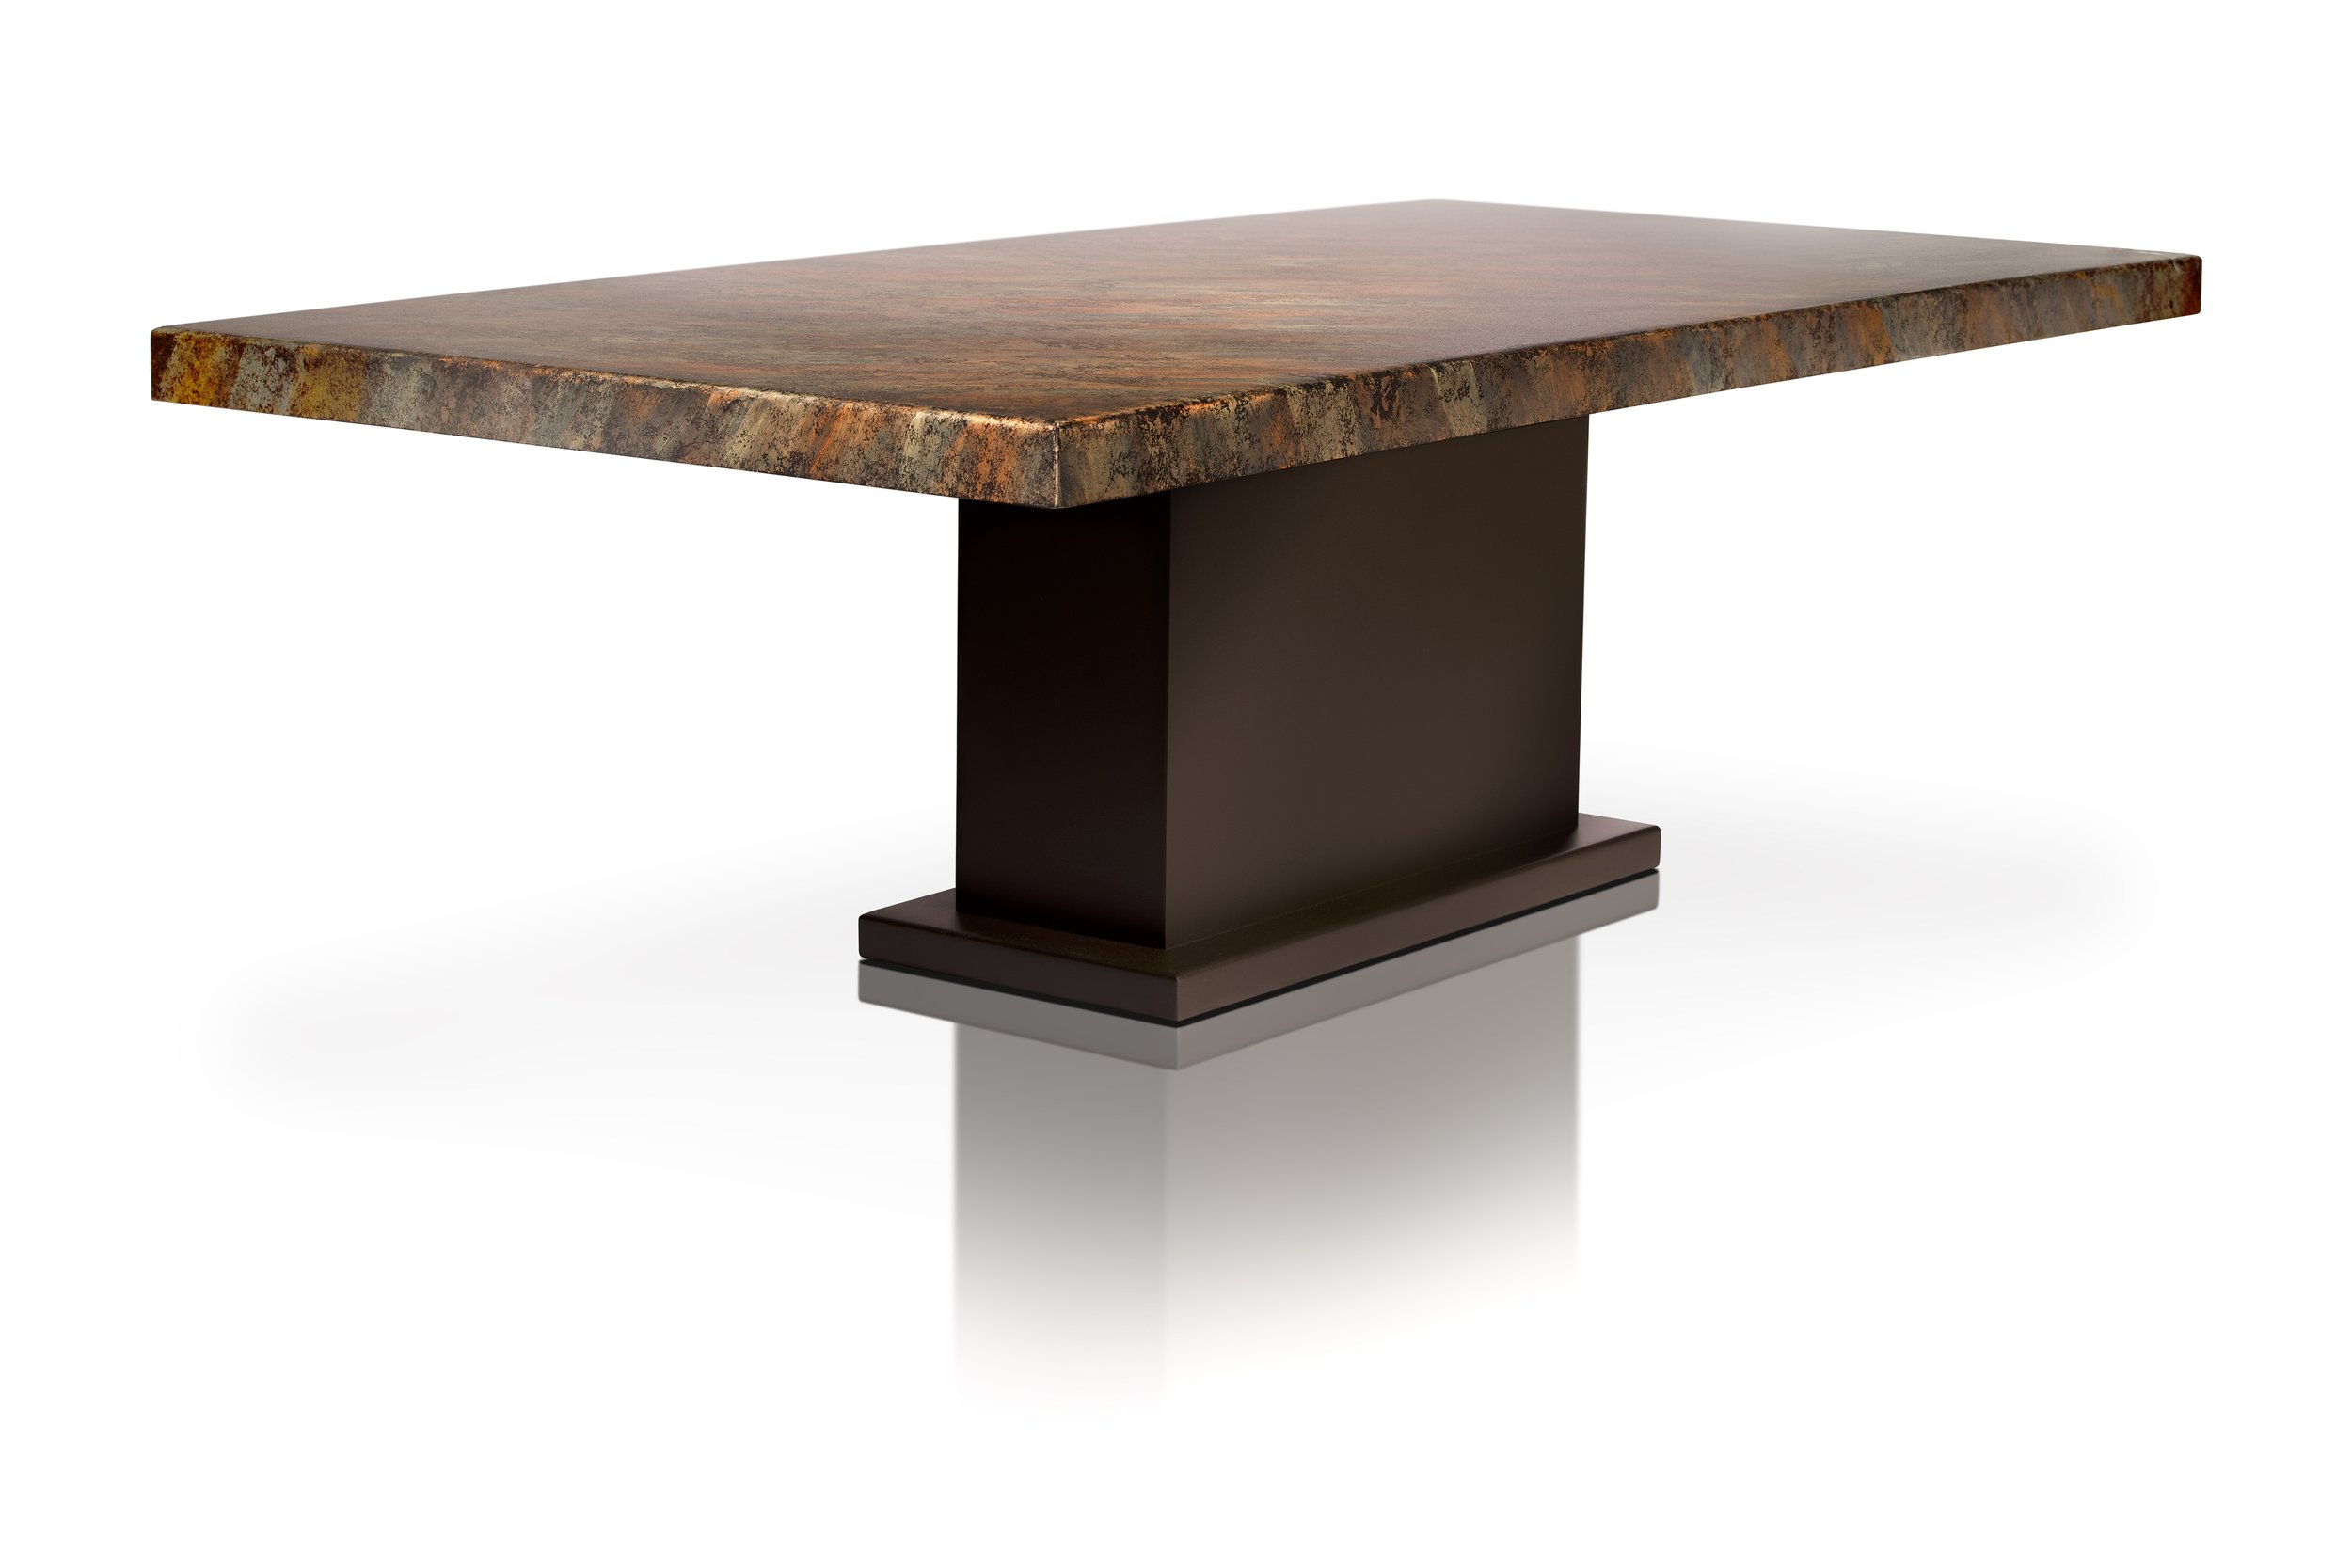 Metall Furniture_Dining Table-Rec_Hillstone-1_PIC-2 copy.jpg